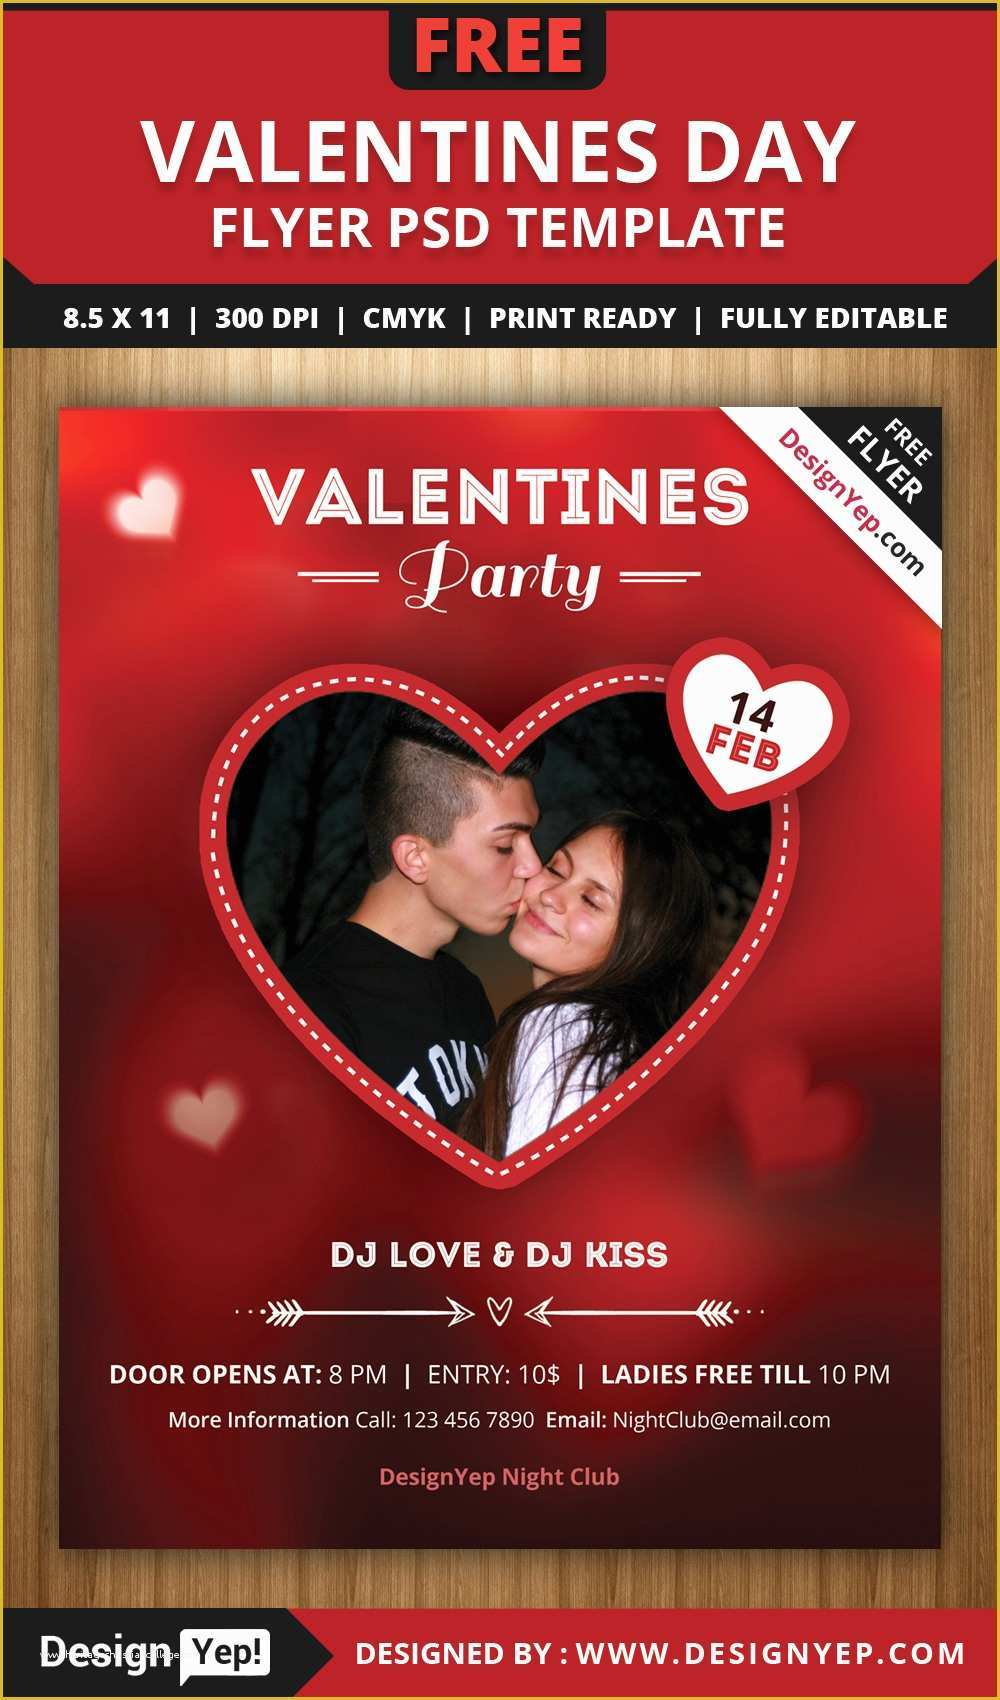 party-flyer-template-free-of-free-psd-valentines-party-flyer-template